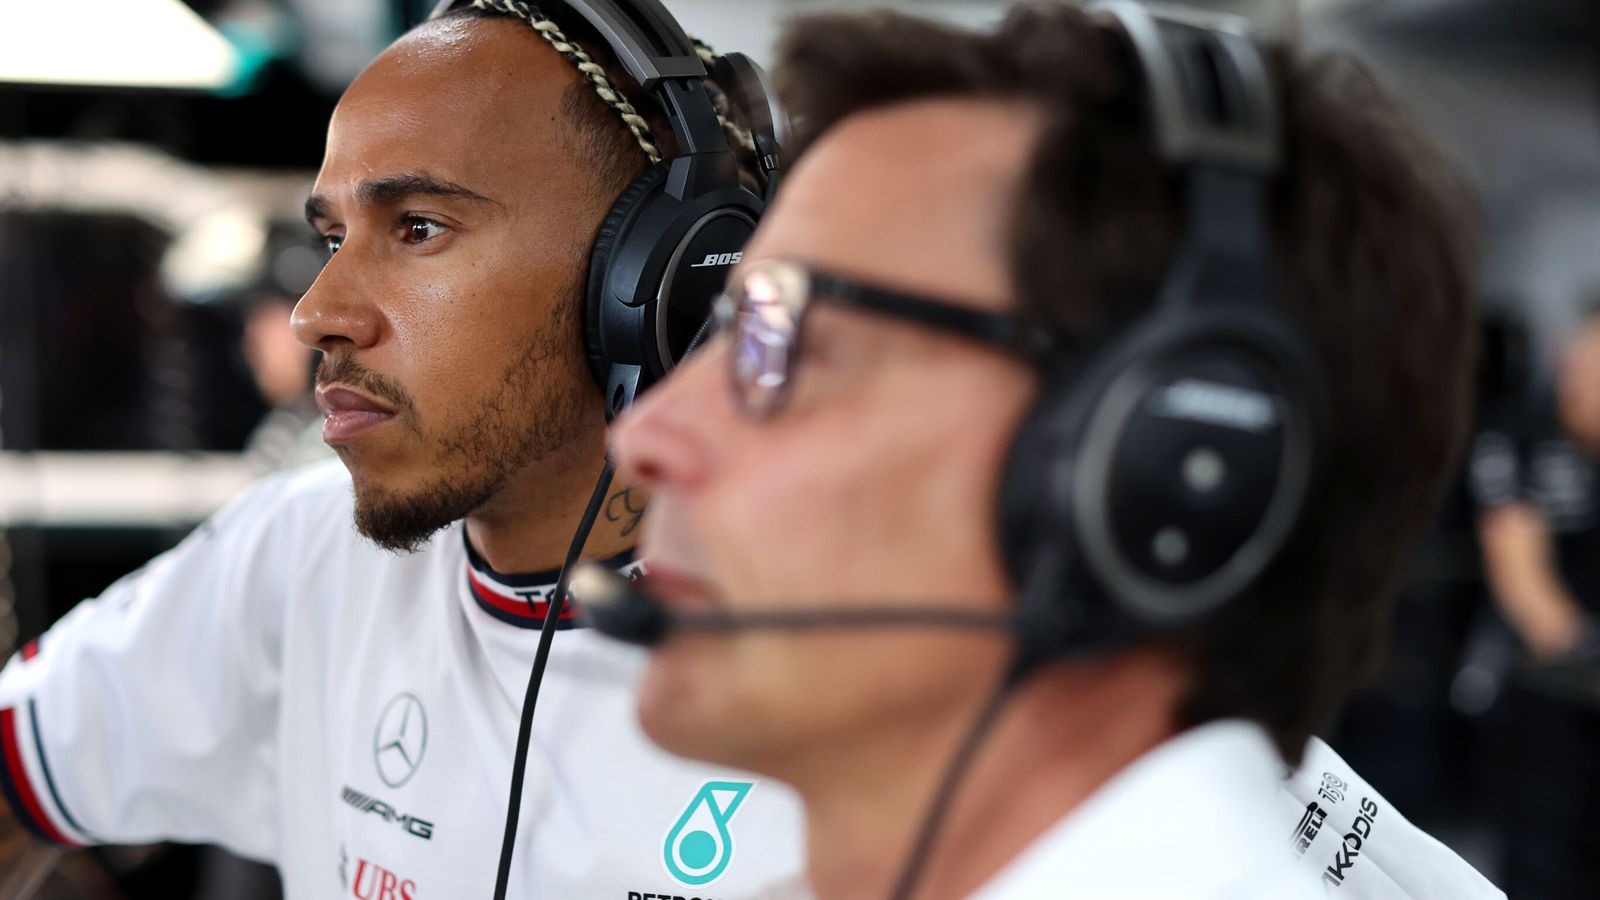 French GP: Lewis Hamilton says Red Bull, Ferrari in ‘own league’ after more Mercedes disappointment